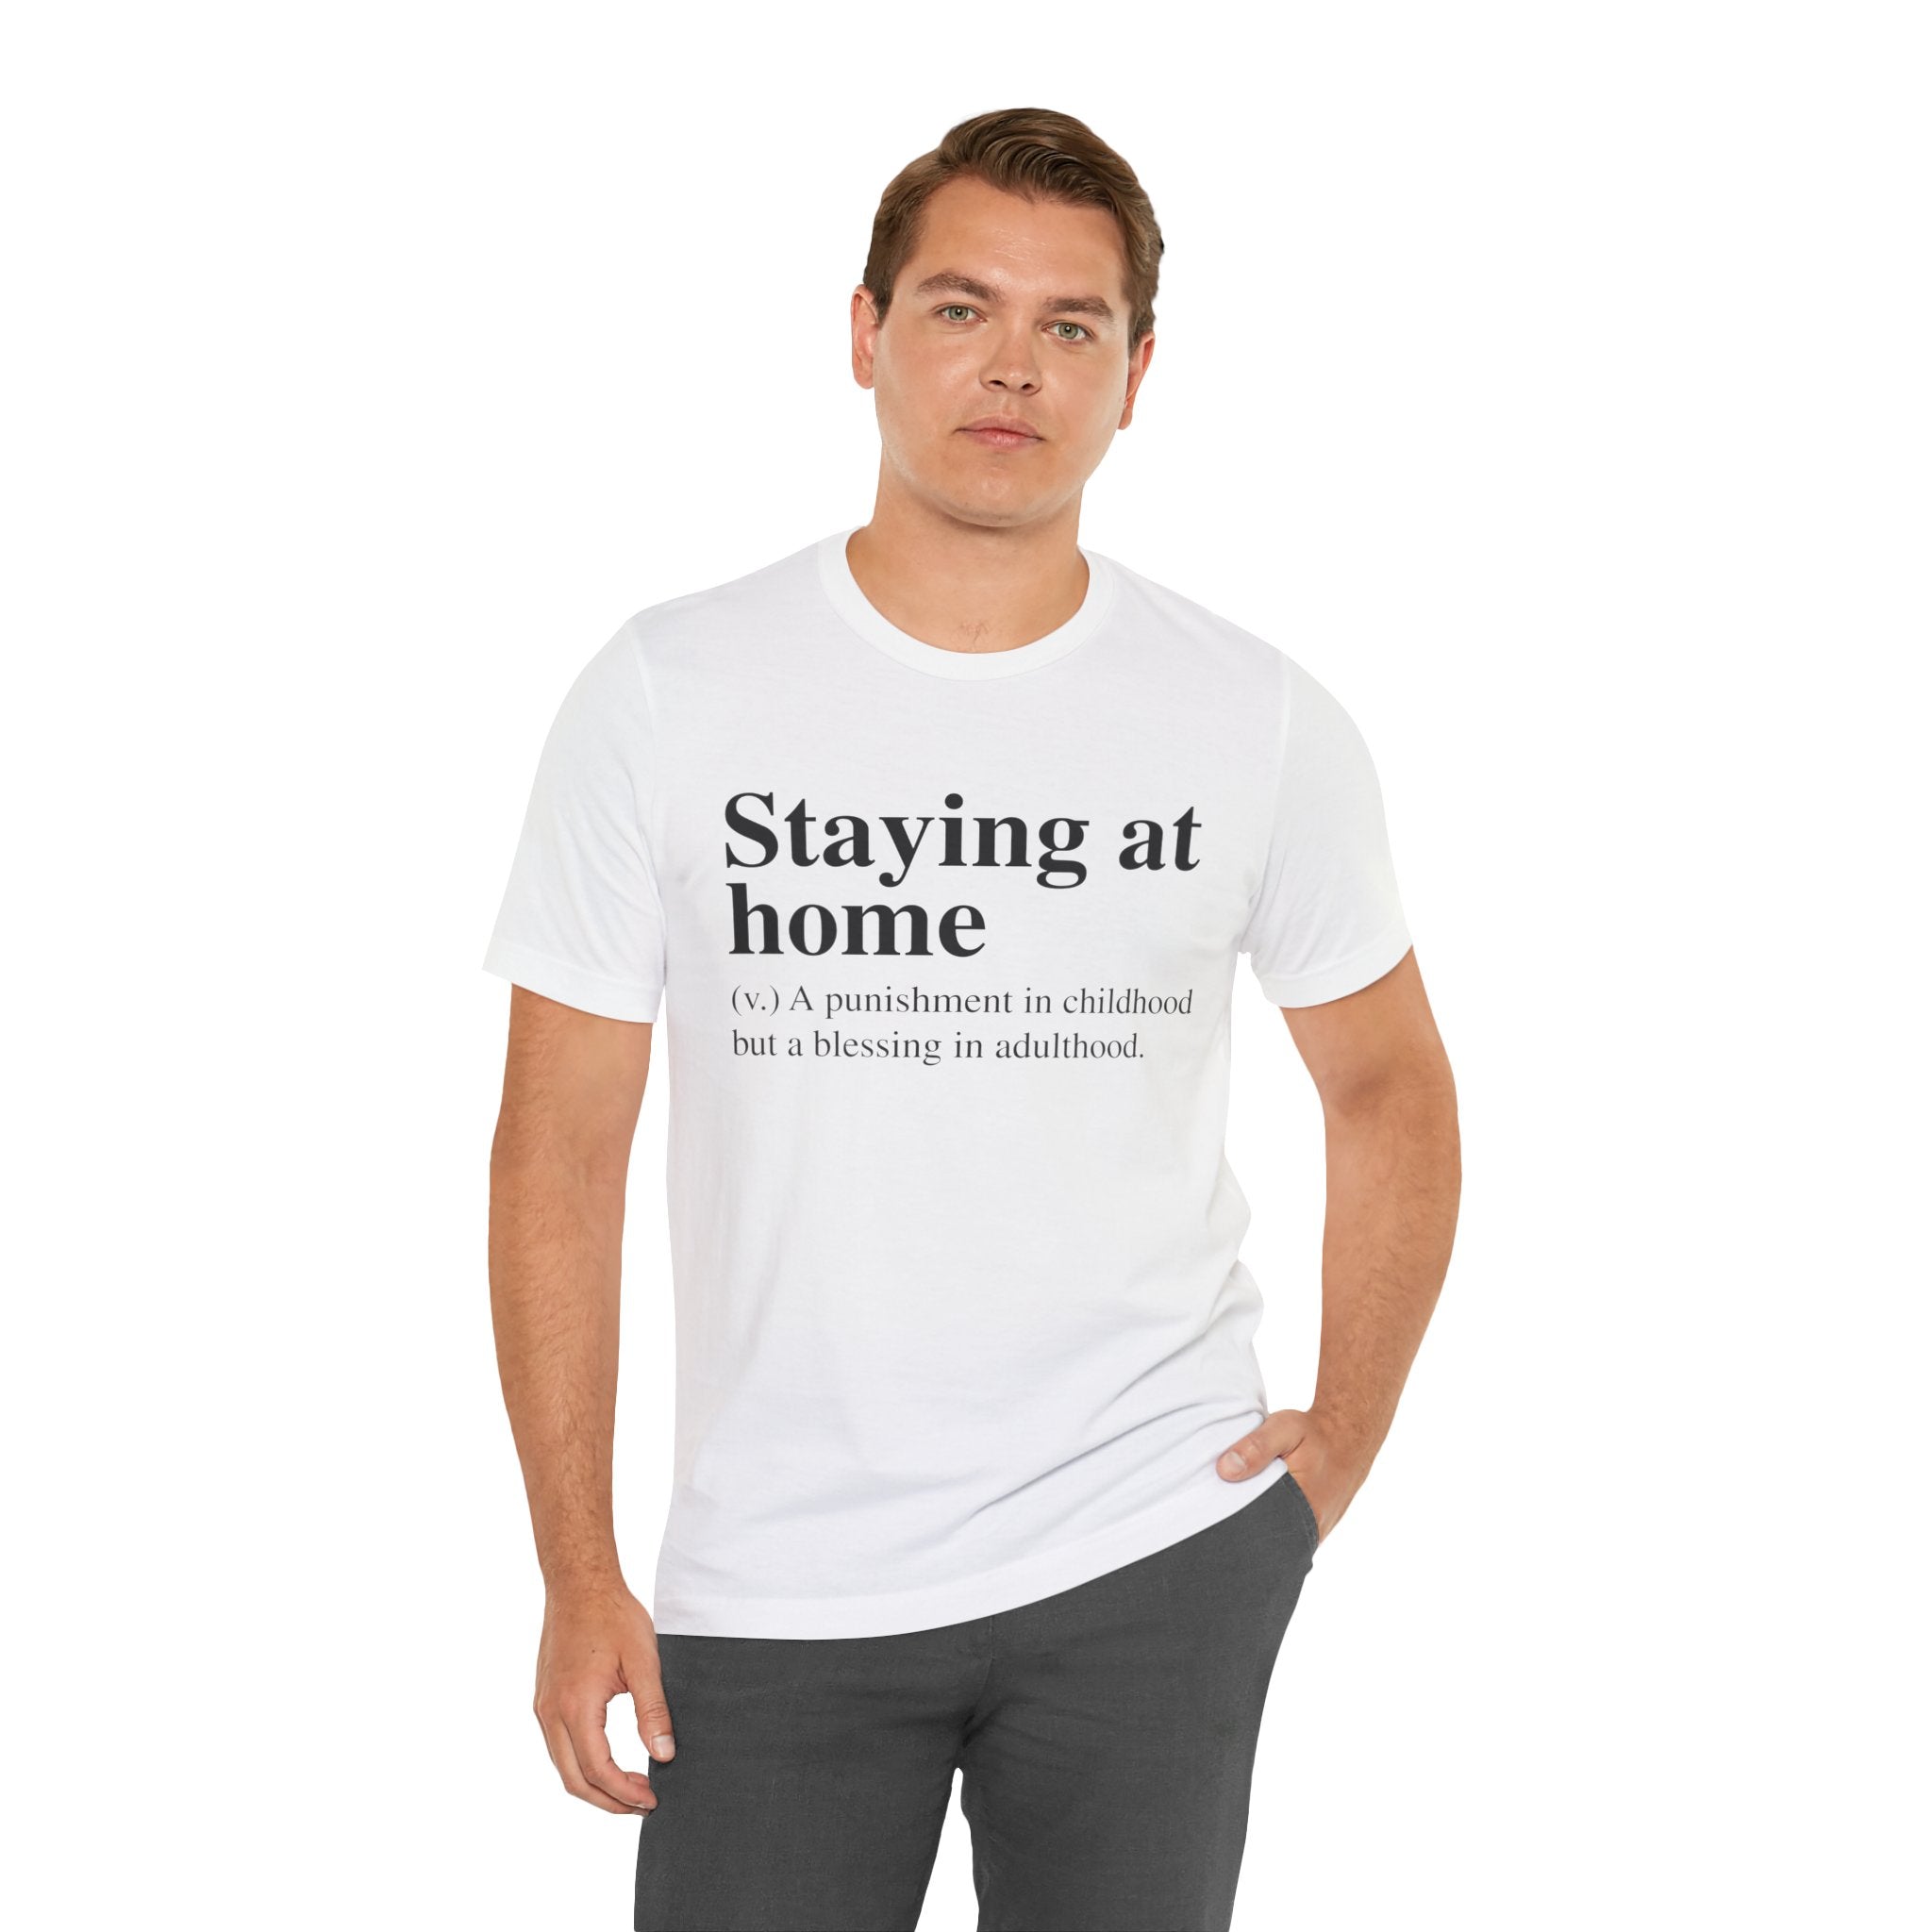 Man wearing a Staying at Home T-Shirt with the text "staying home (v.) a punishment in childhood but a blessing in adulthood" printed on it.